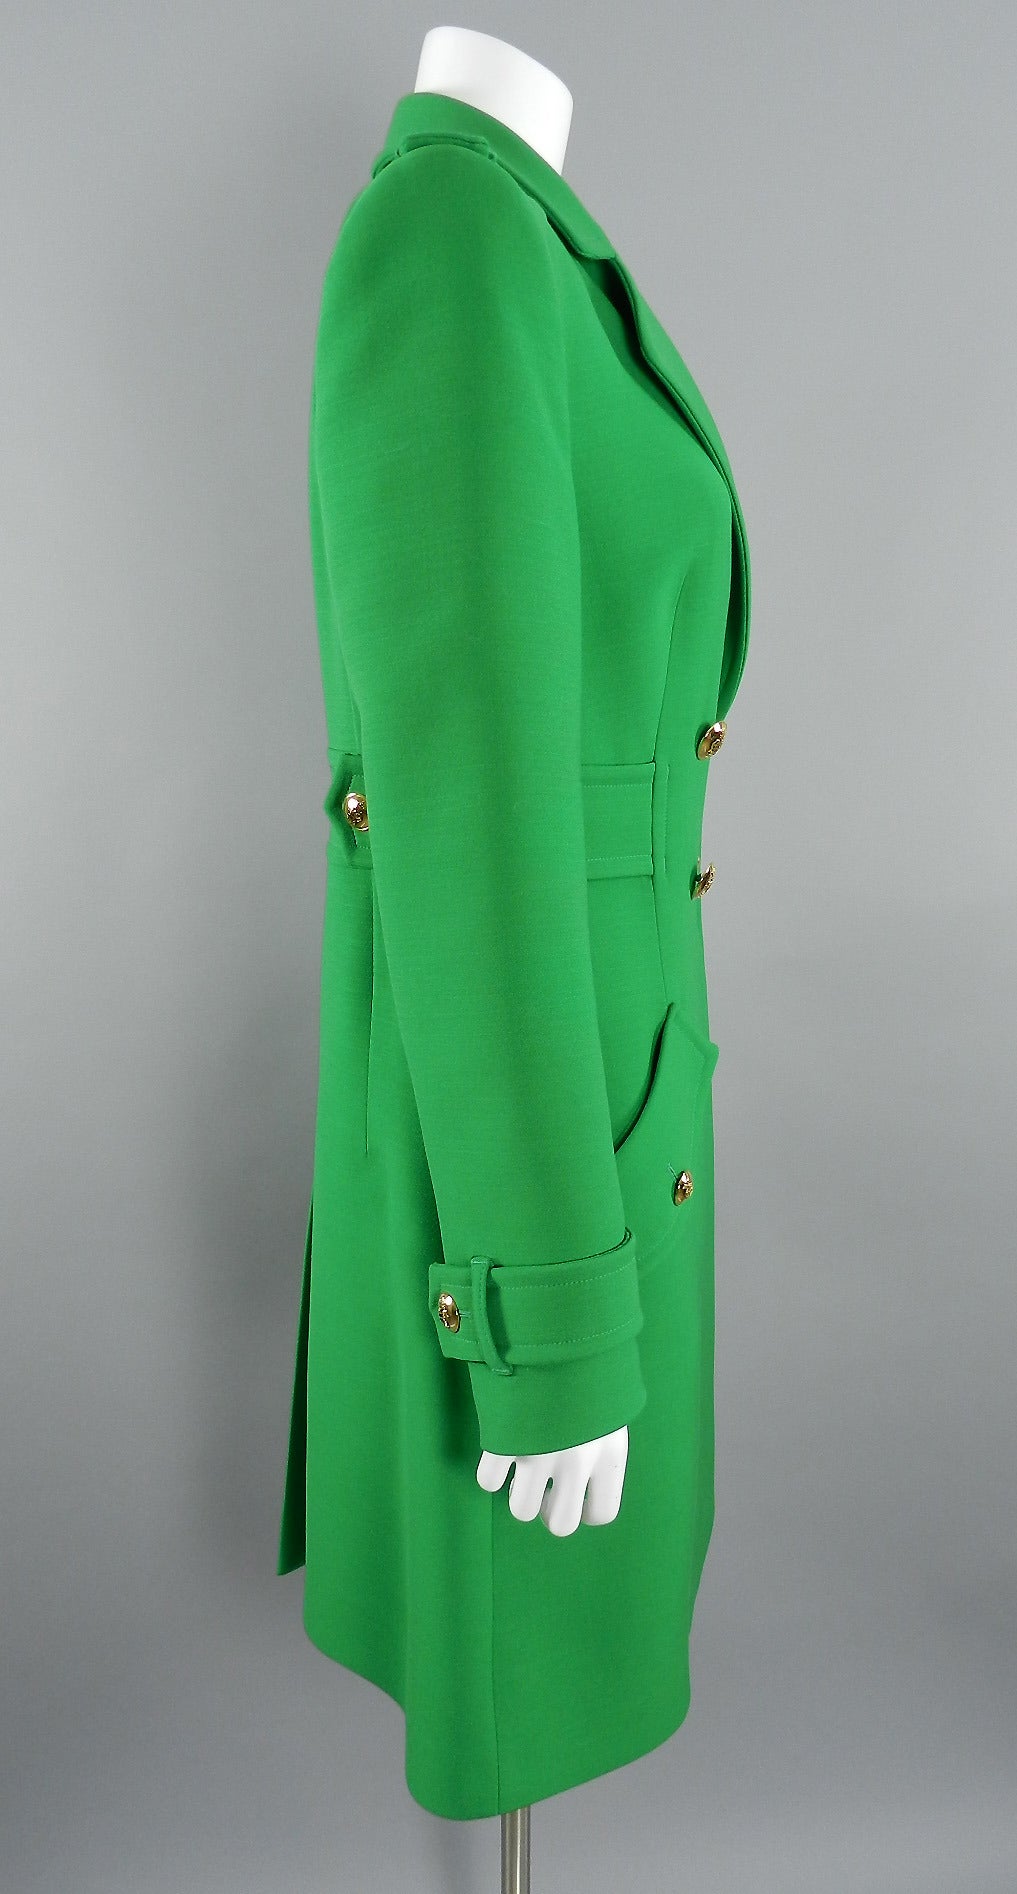 Emilio Pucci green wool coat with gold buttons. 2015 Collection.  Excellent pre-owned condition - worn once.  Original retail $3650+ Tagged size IT 42 (USA 6).  To fit 34